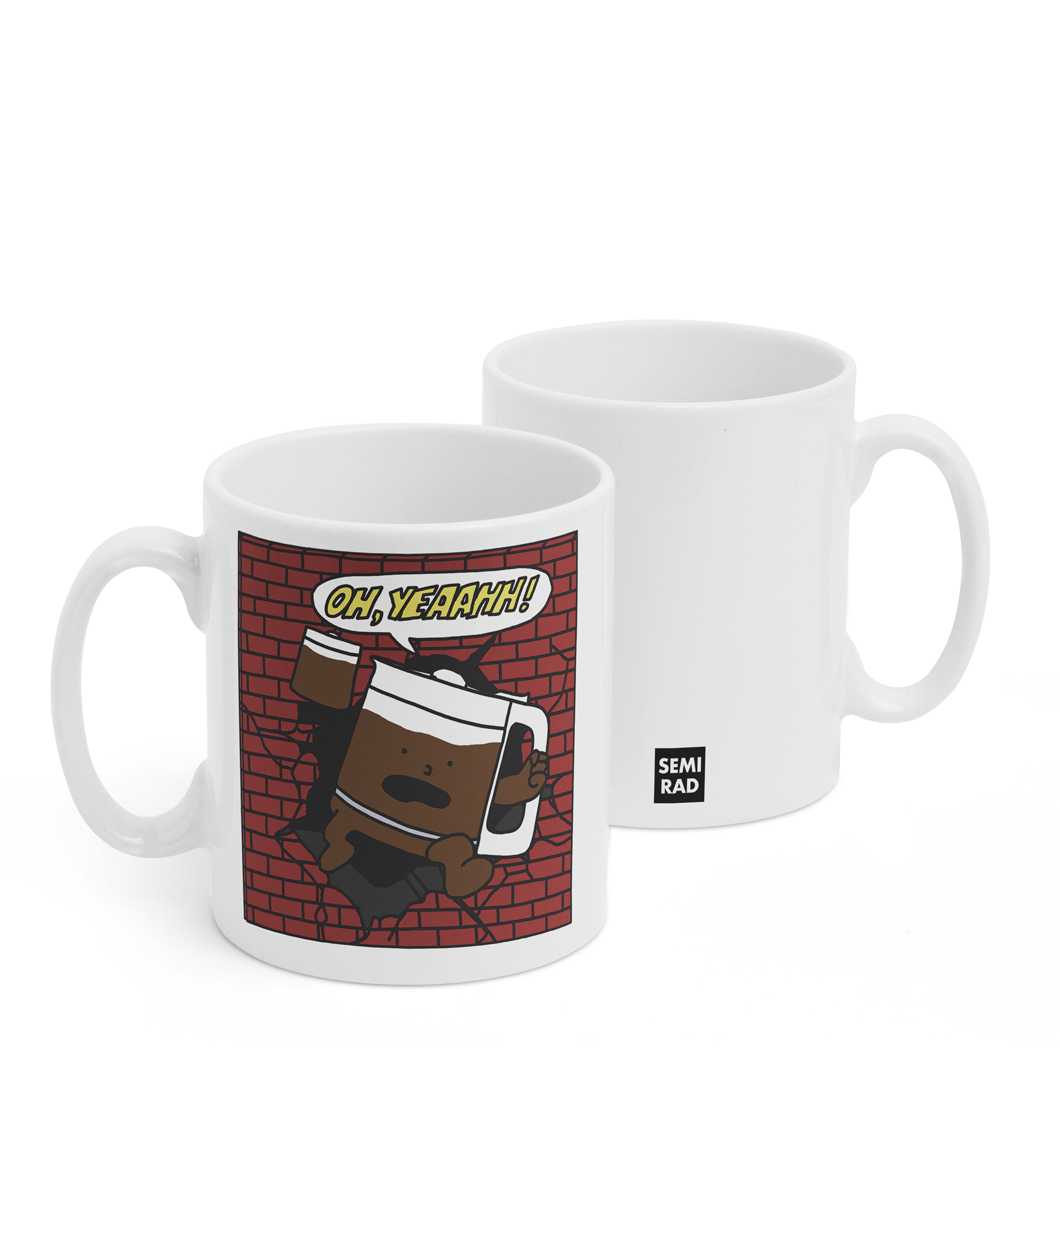 Two white mugs sitting next to each other showing two sides of the same mug. The front side has an illustration of a red, brick wall with a coffee pot with a face, holding a coffee mug breaking through with a speech bubble that says "Oh, yeaahh!" . On the back of the mug is a small black square with the words "Semi Rad".